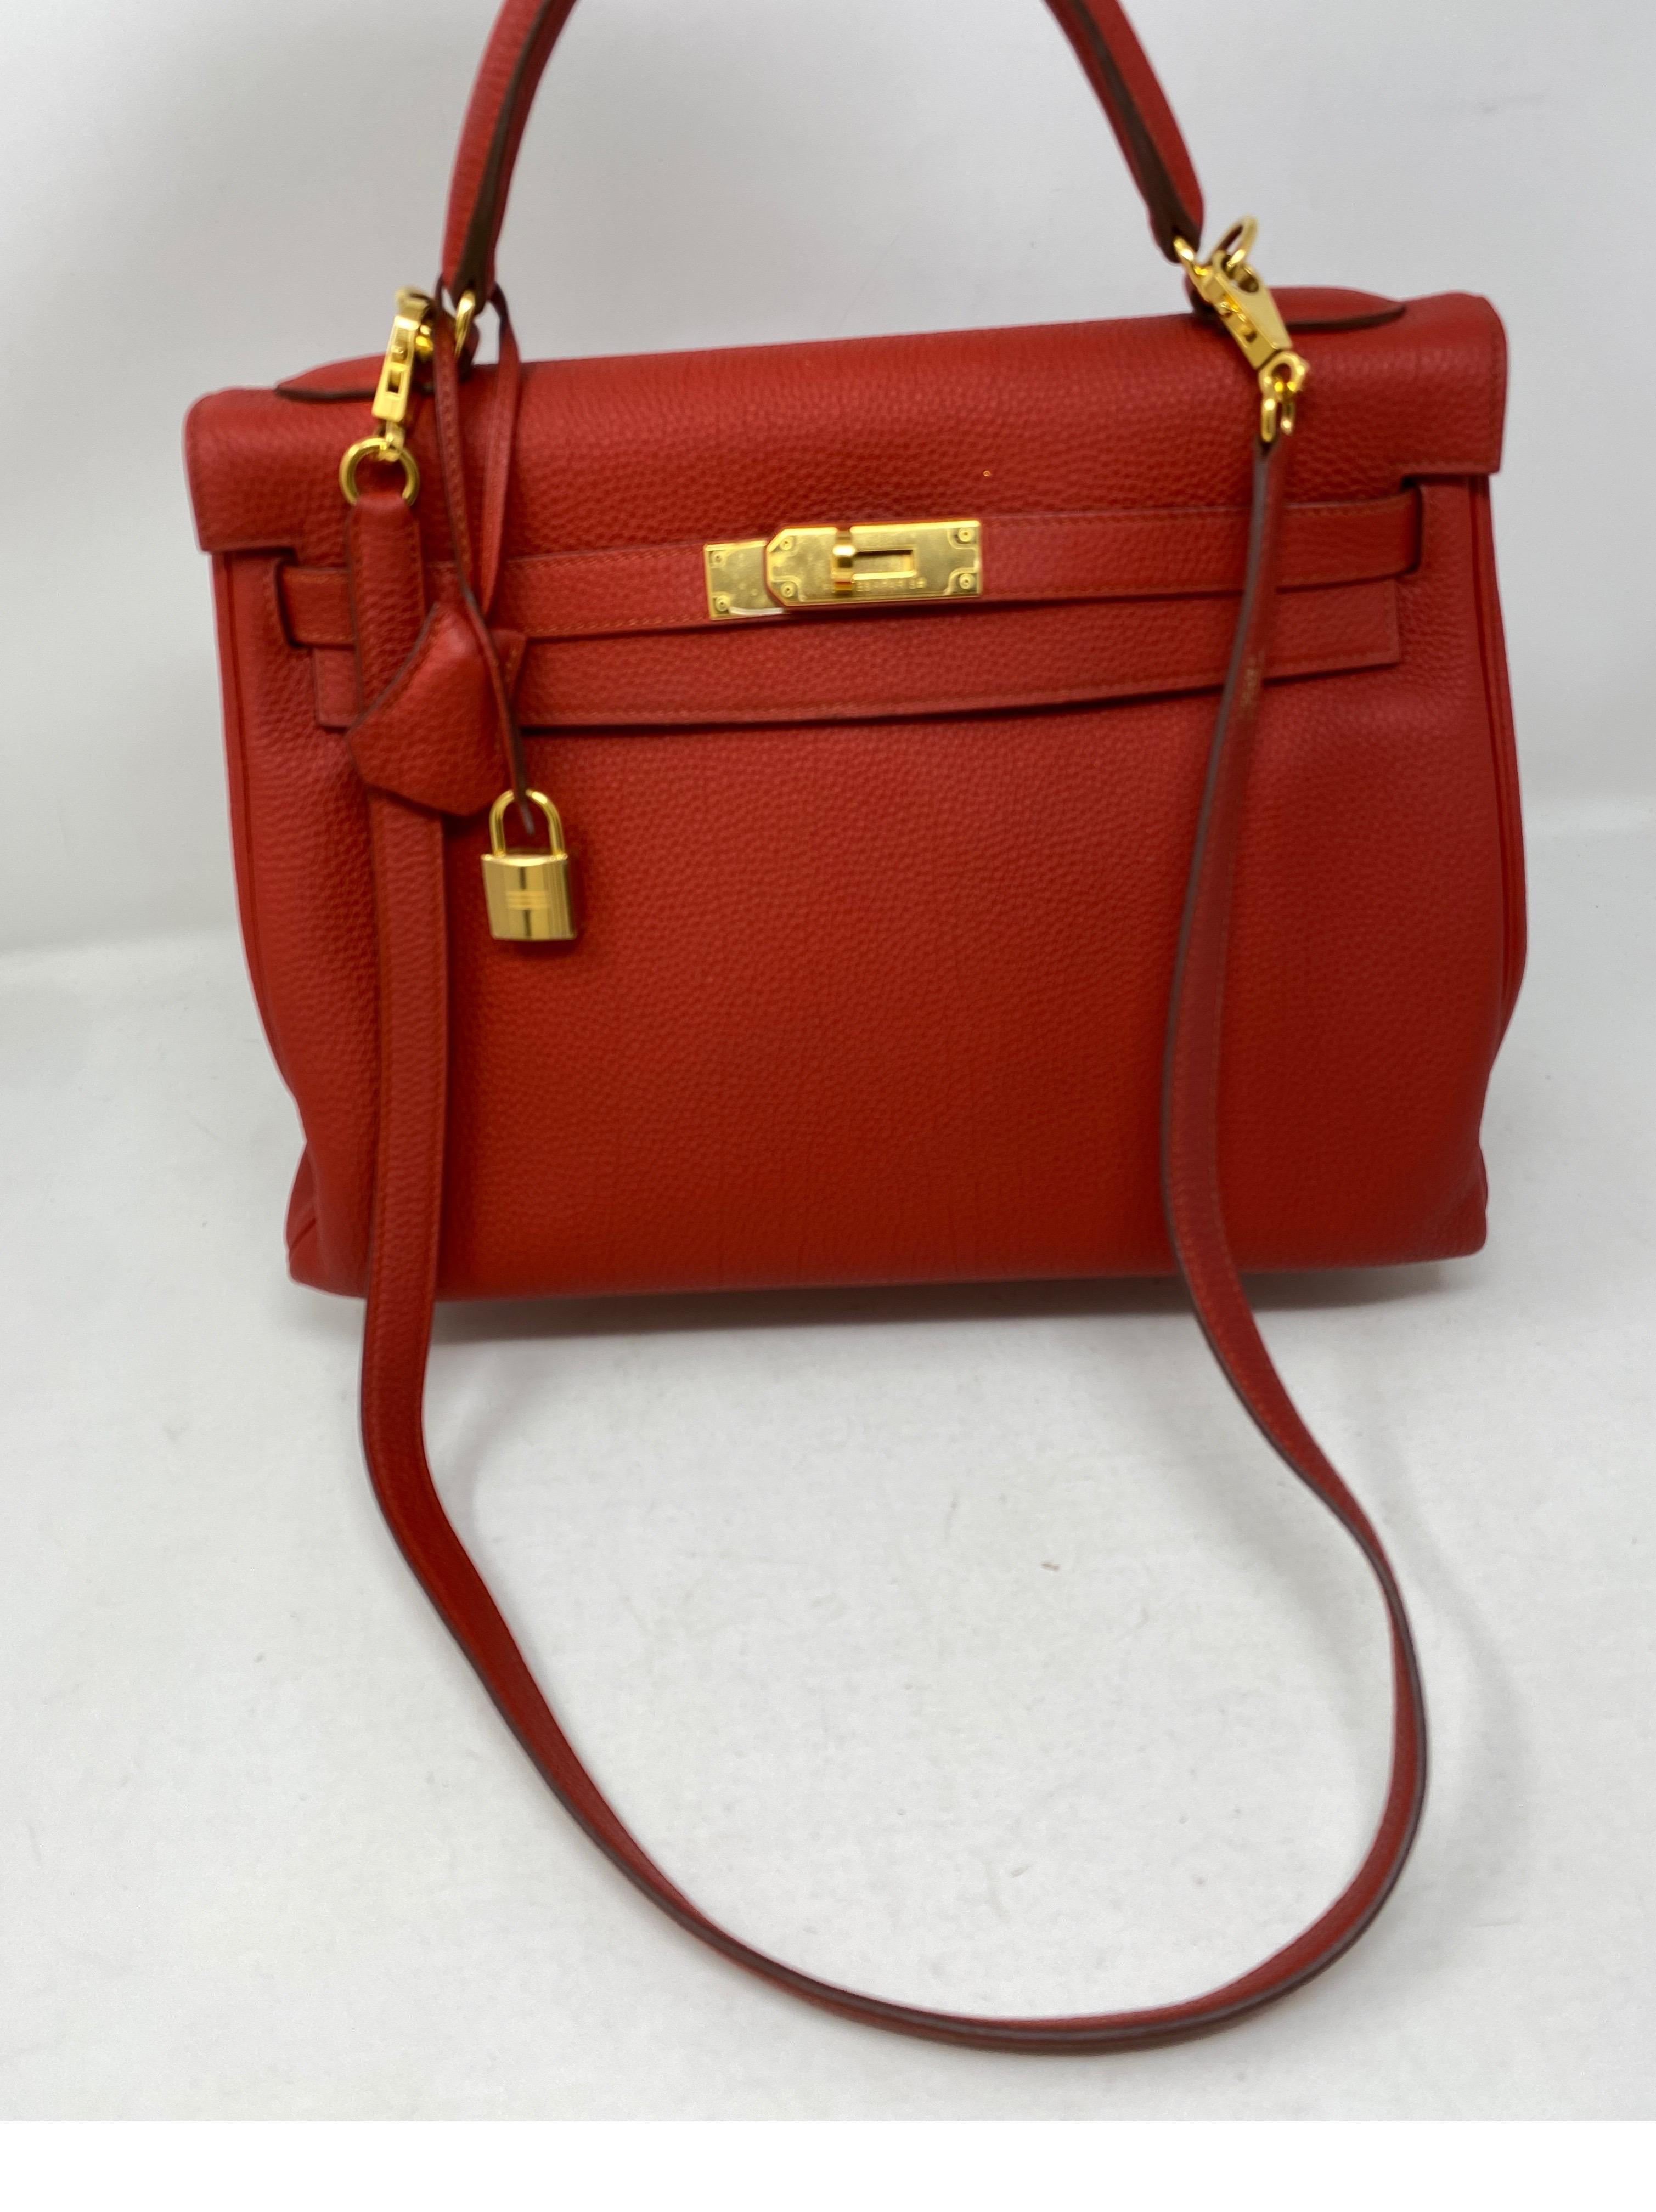 Hermes Sanguine Kelly 32 Bag. Deep red color with gold hardware. Beautiful color. Good condition. Togo leather. Includes clochette, lock, keys and dust cover. Guaranteed authentic. 